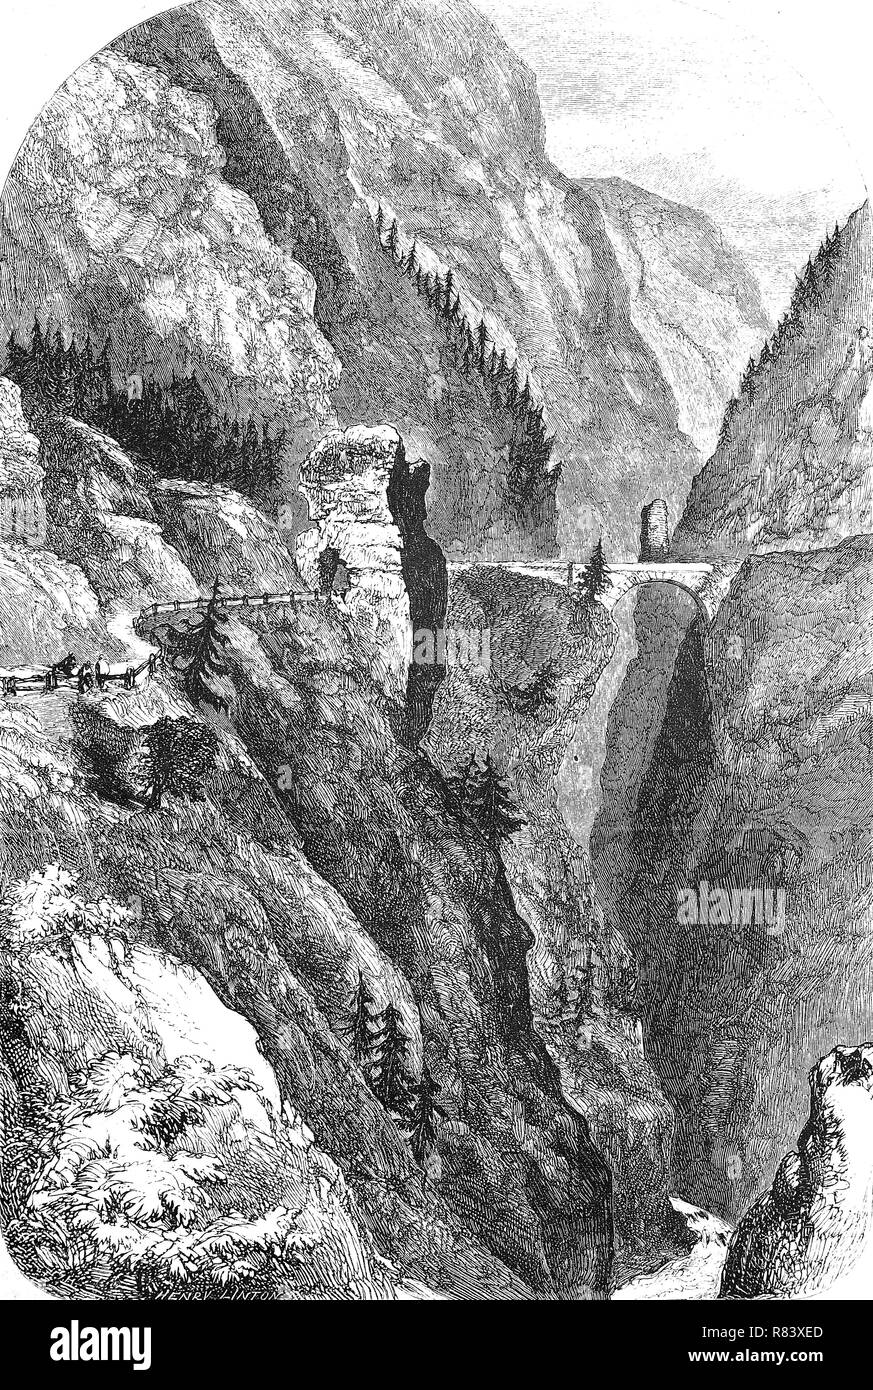 Digital improved reproduction, Viamala or Via Mala, ancient and notorious section of a path along the river Hinterrhein between Zillis-Reischen and Thusis in the Canton of GraubÃ¼nden, Switzerland, das Tal der Via Mala in der Schweiz, from an original print from the year 1855 Stock Photo